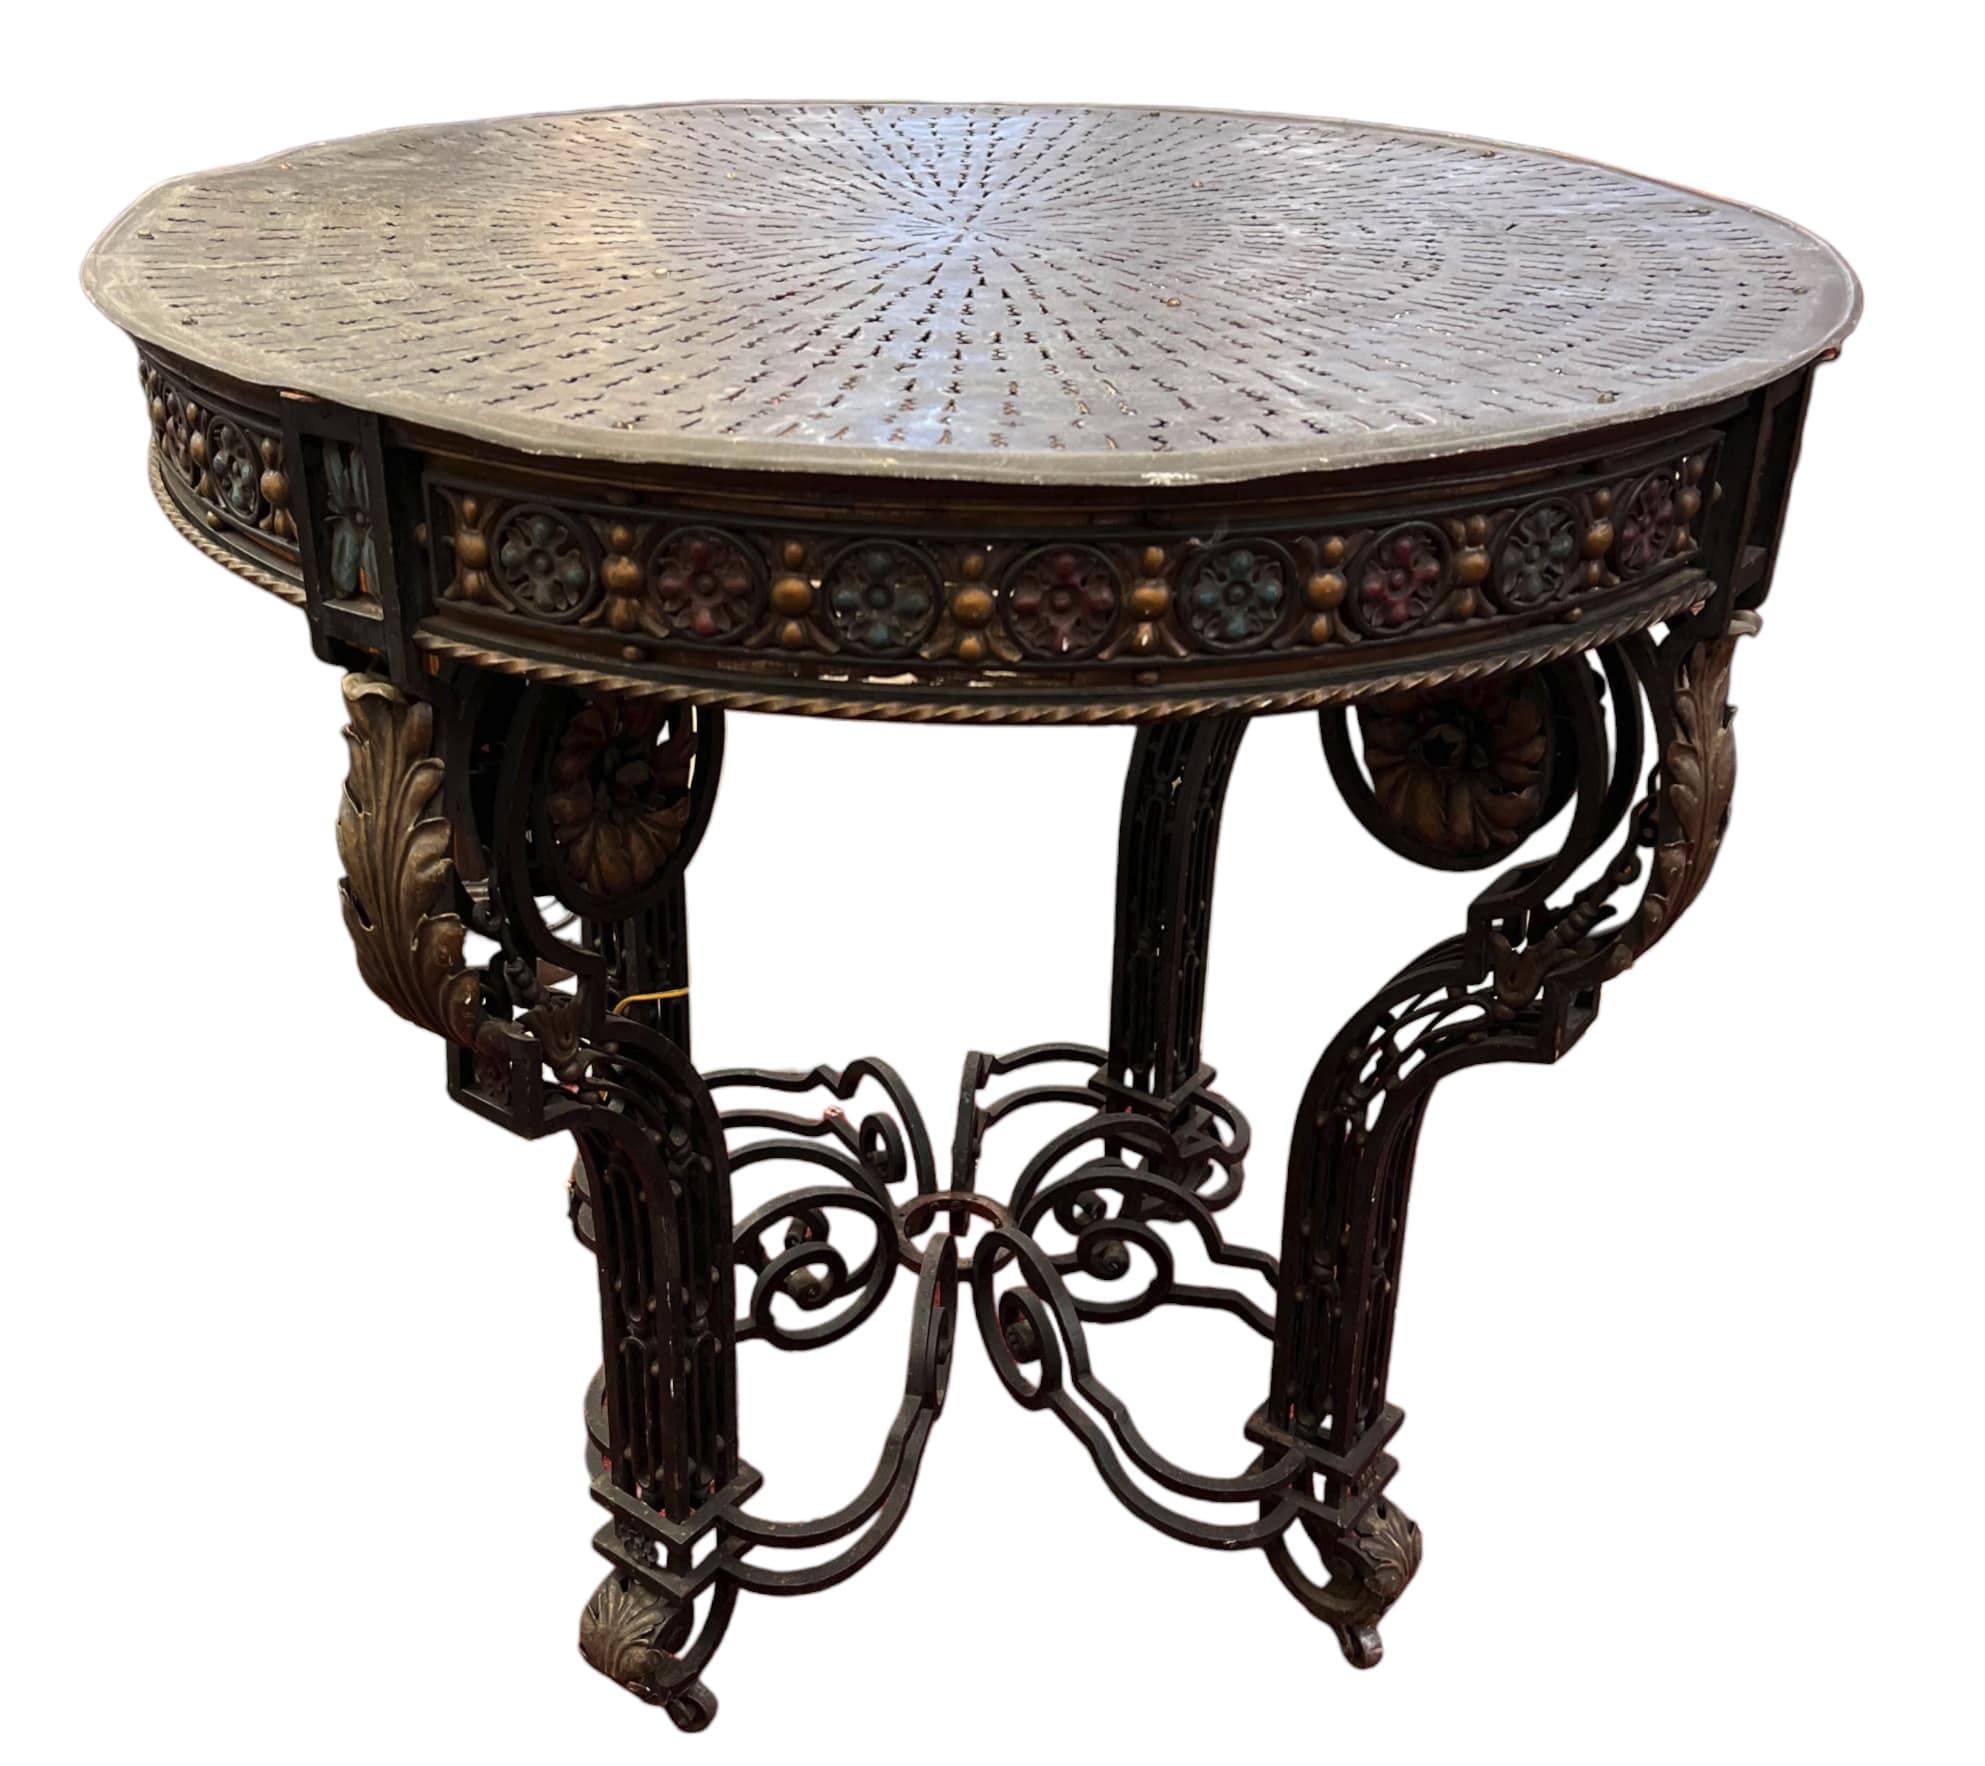 Hand-Crafted 19th Century Wrought Iron 32 Inch Round Table With Built-In Light For Sale